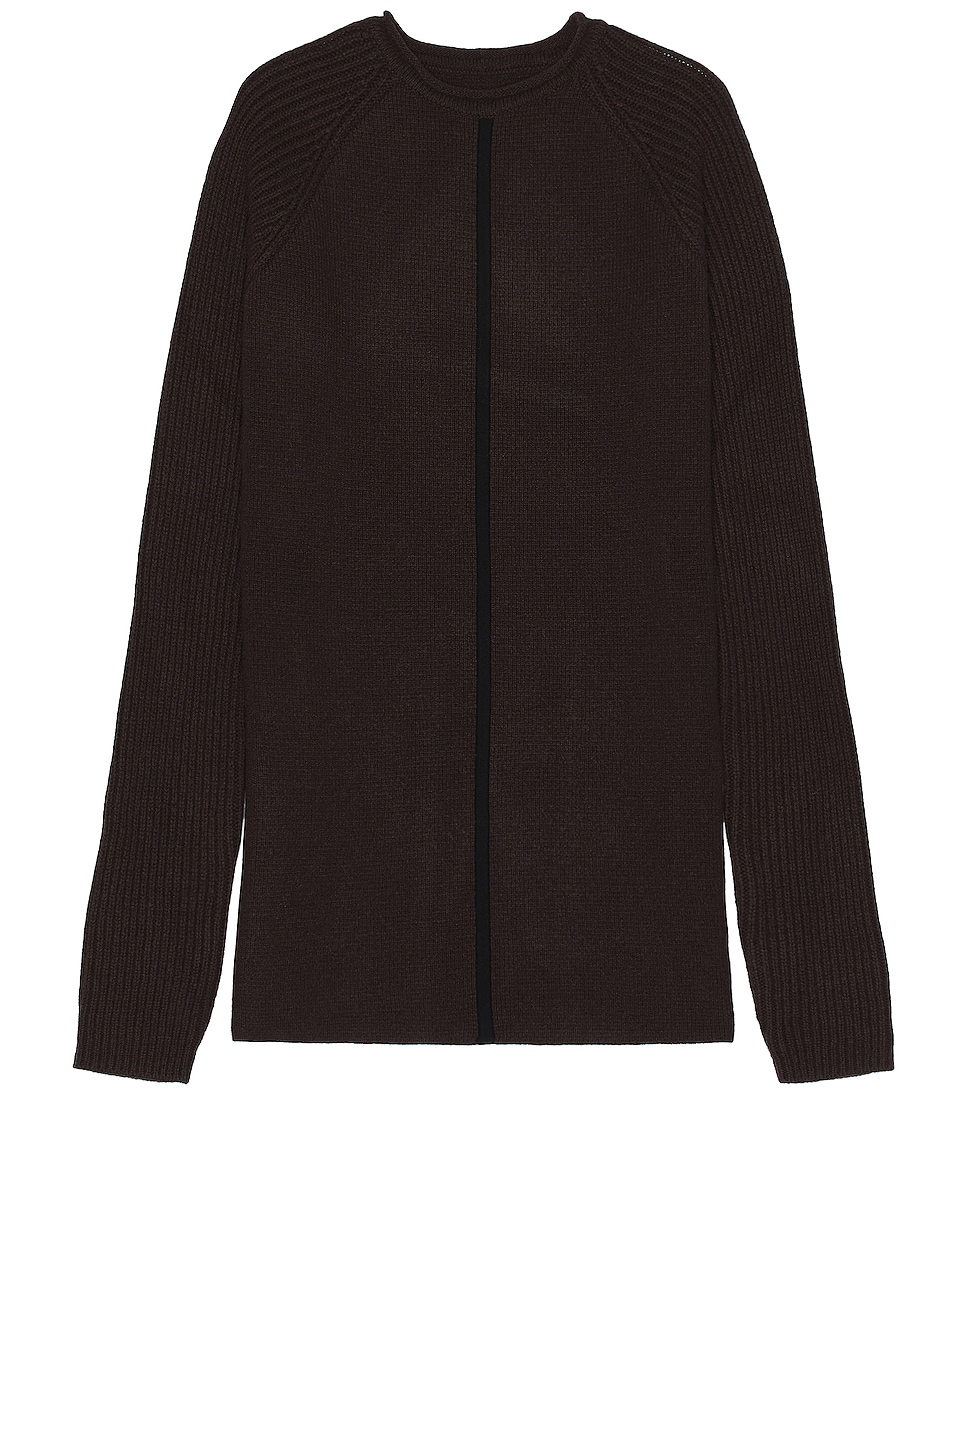 Image 1 of Rick Owens Maglia Sweater in Brown & Black